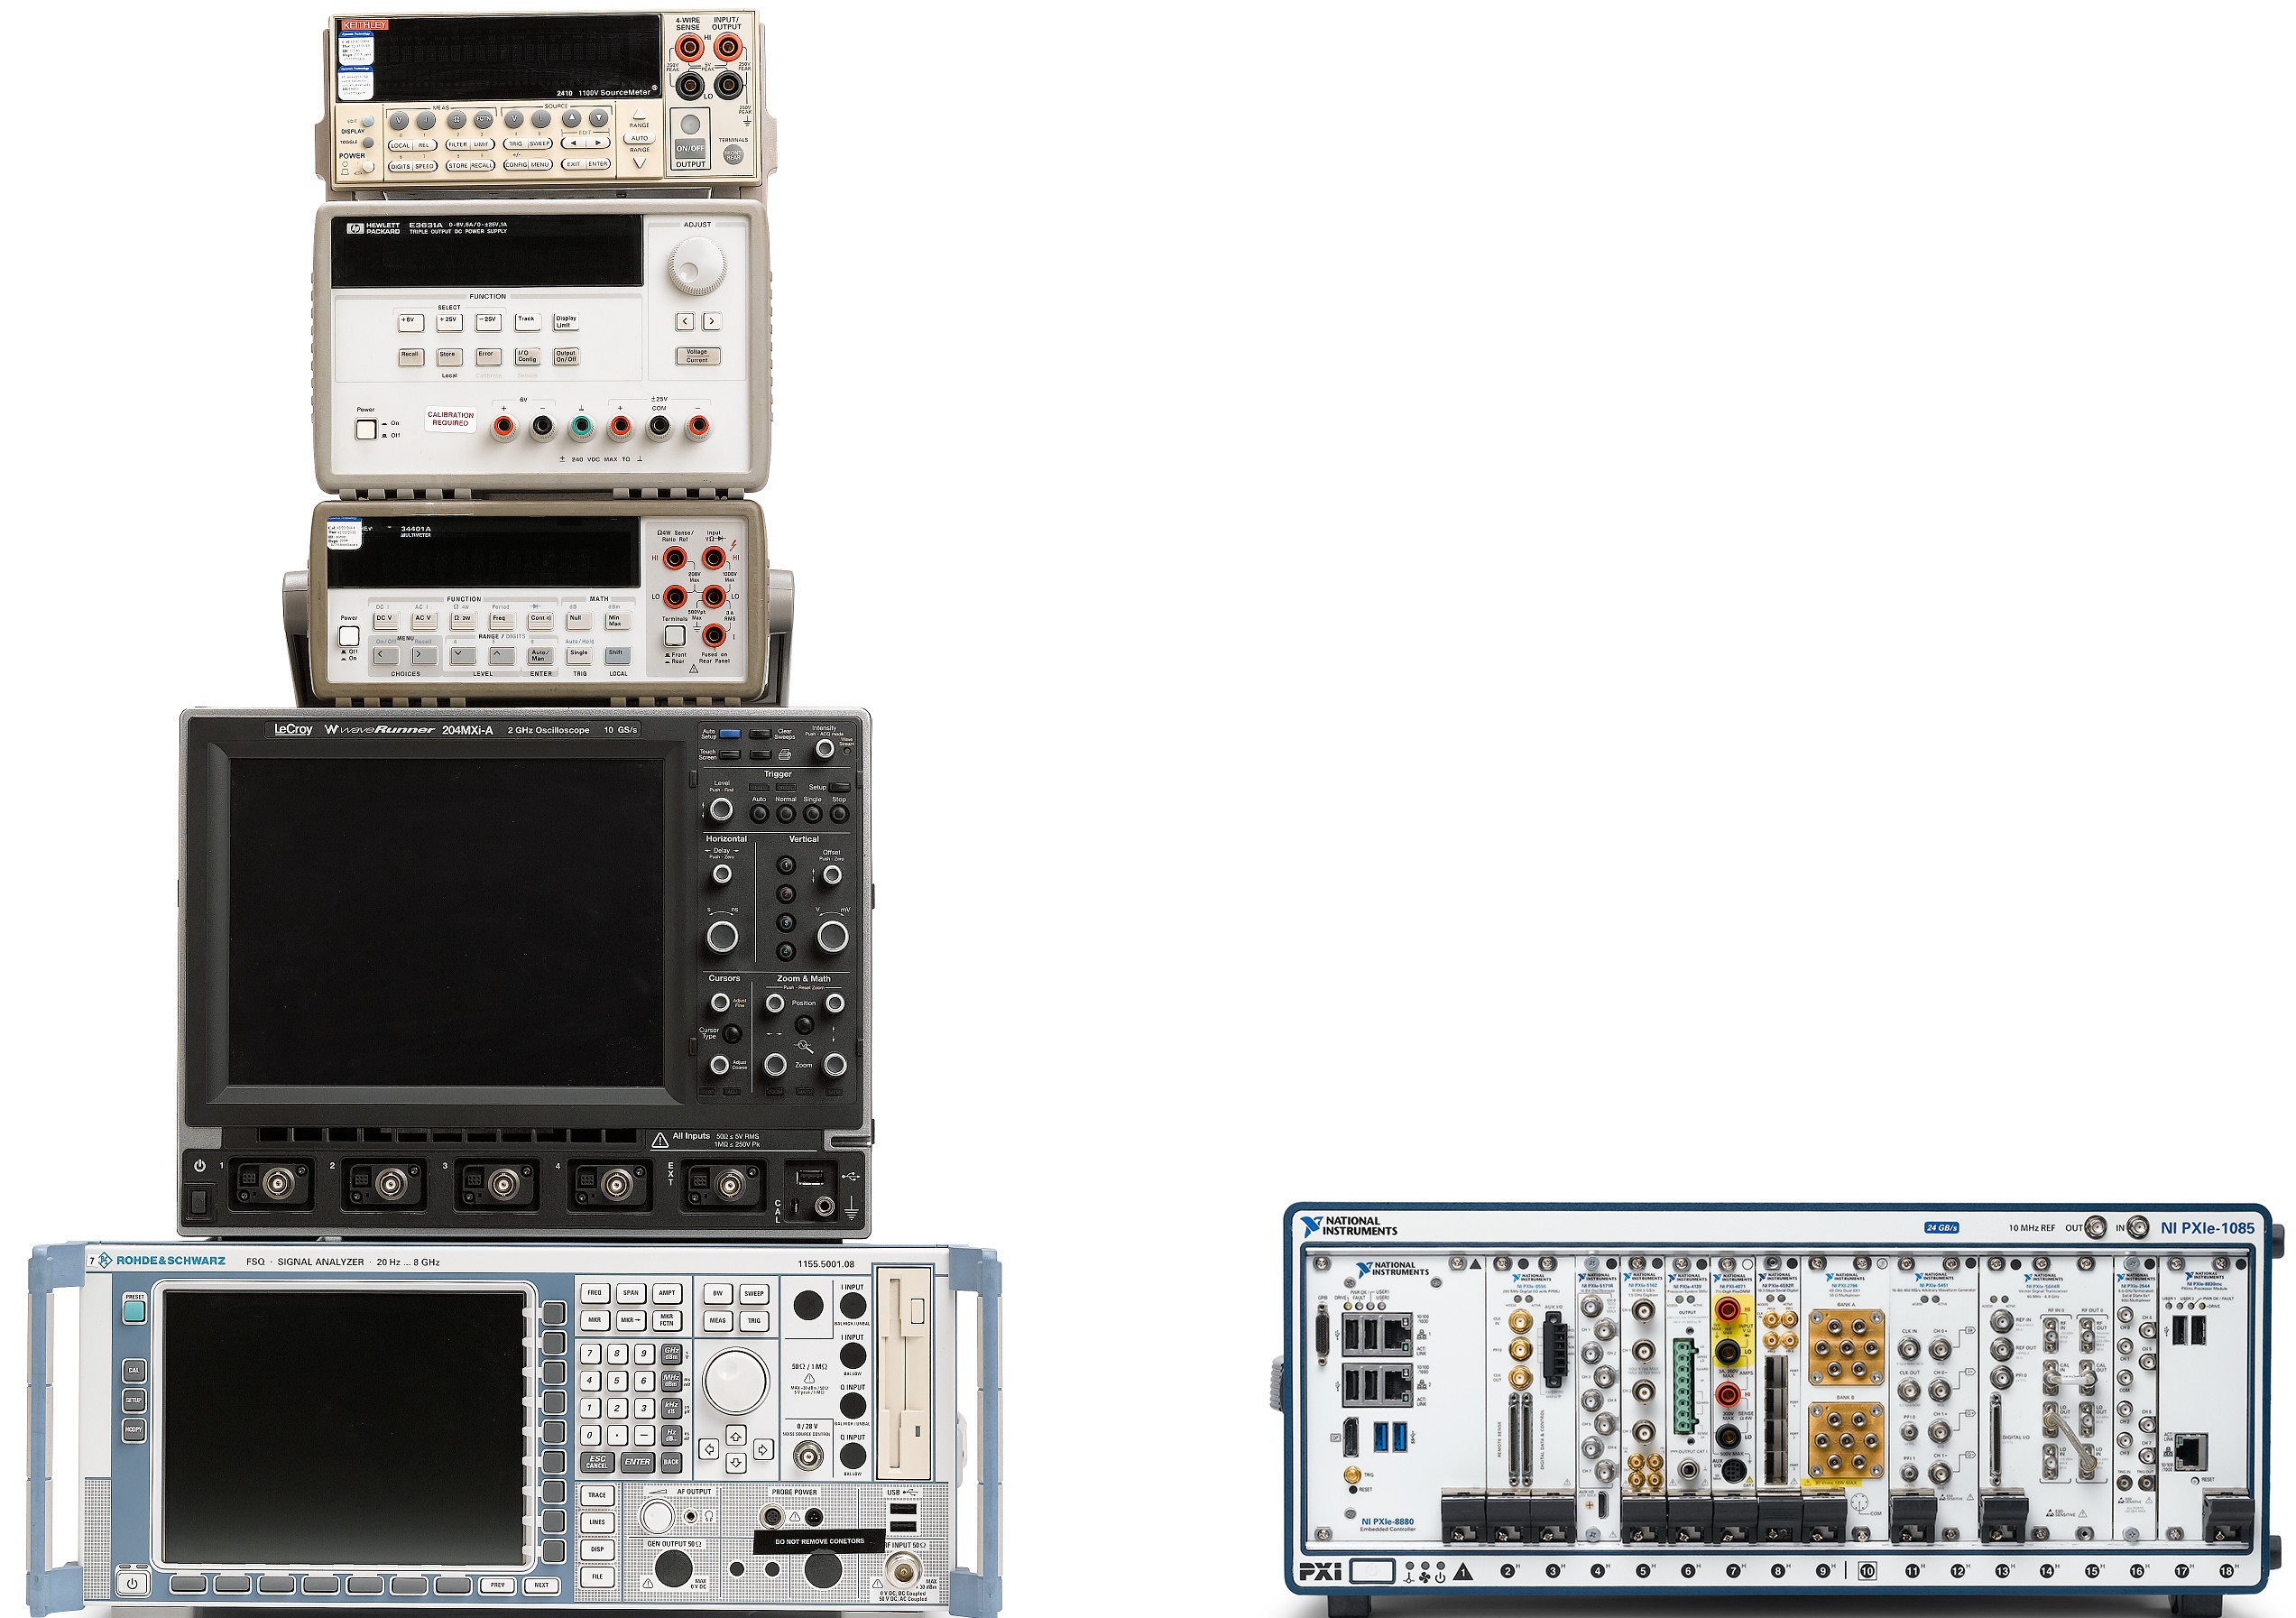 Side-by-side comparison of a stack of five traditional, box instruments (left) and a PXI-based system with multiple instruments (right)